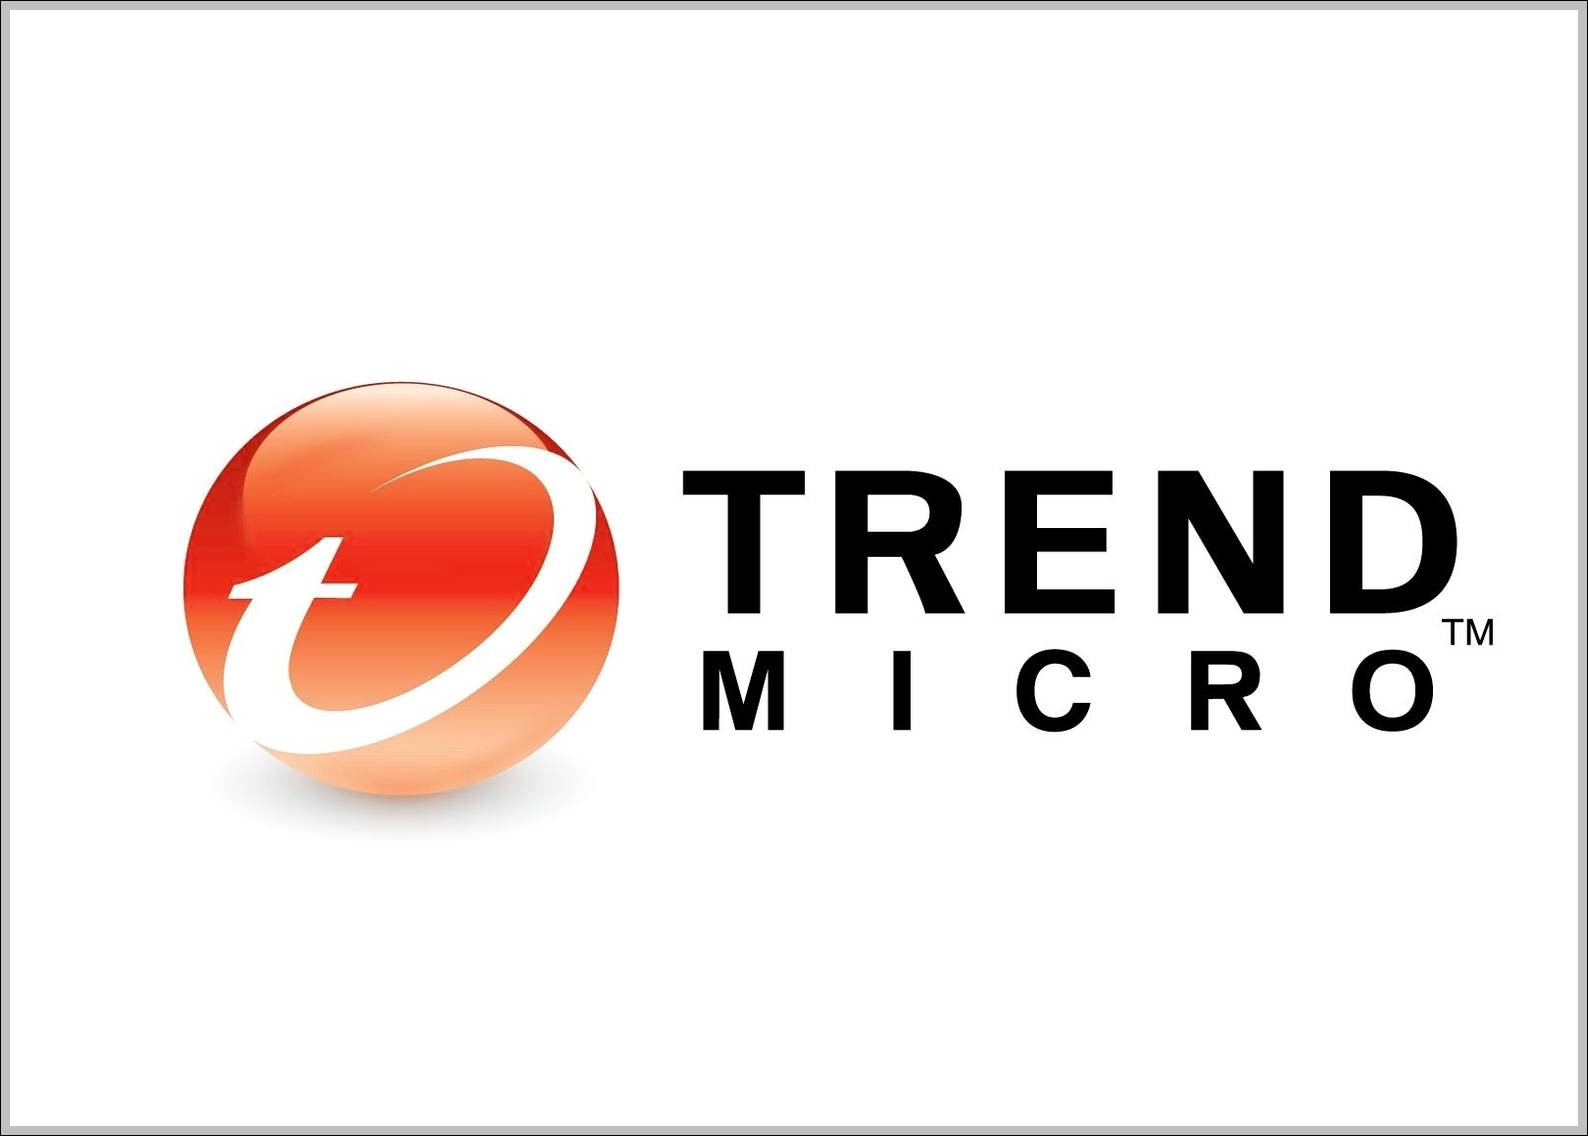 Trend Micro sign